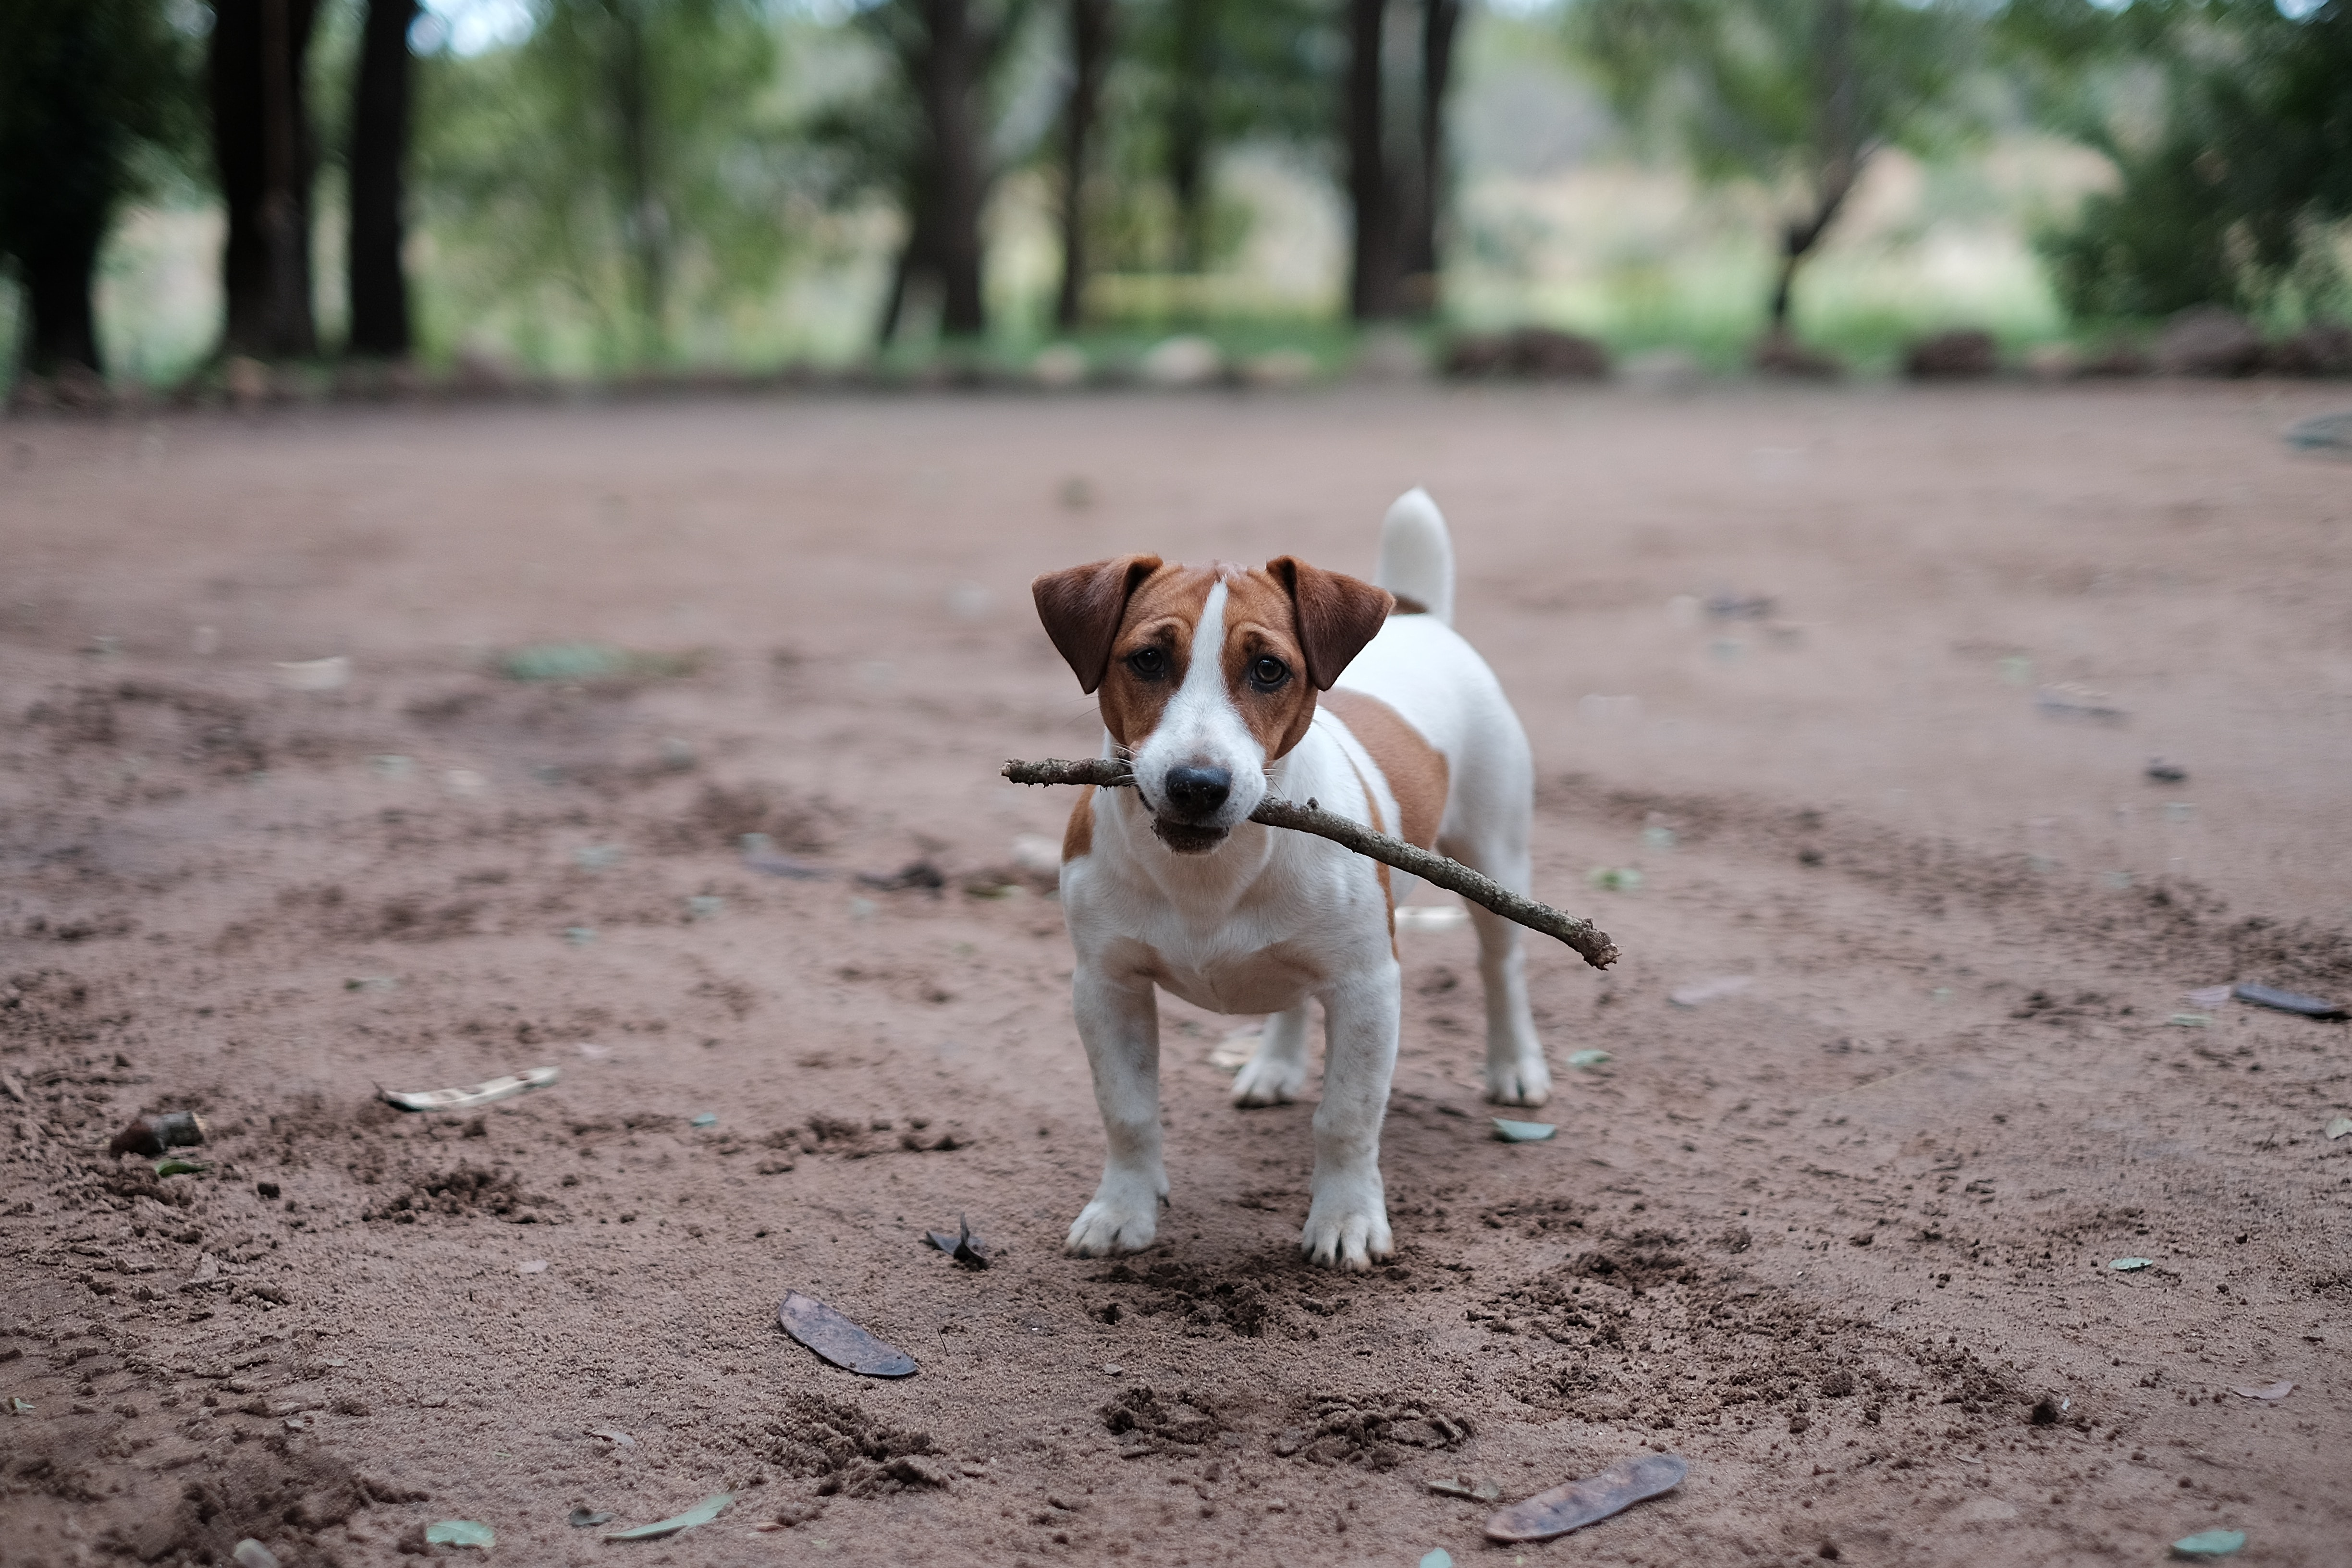 Jack Russell terrier fetches stick on beach